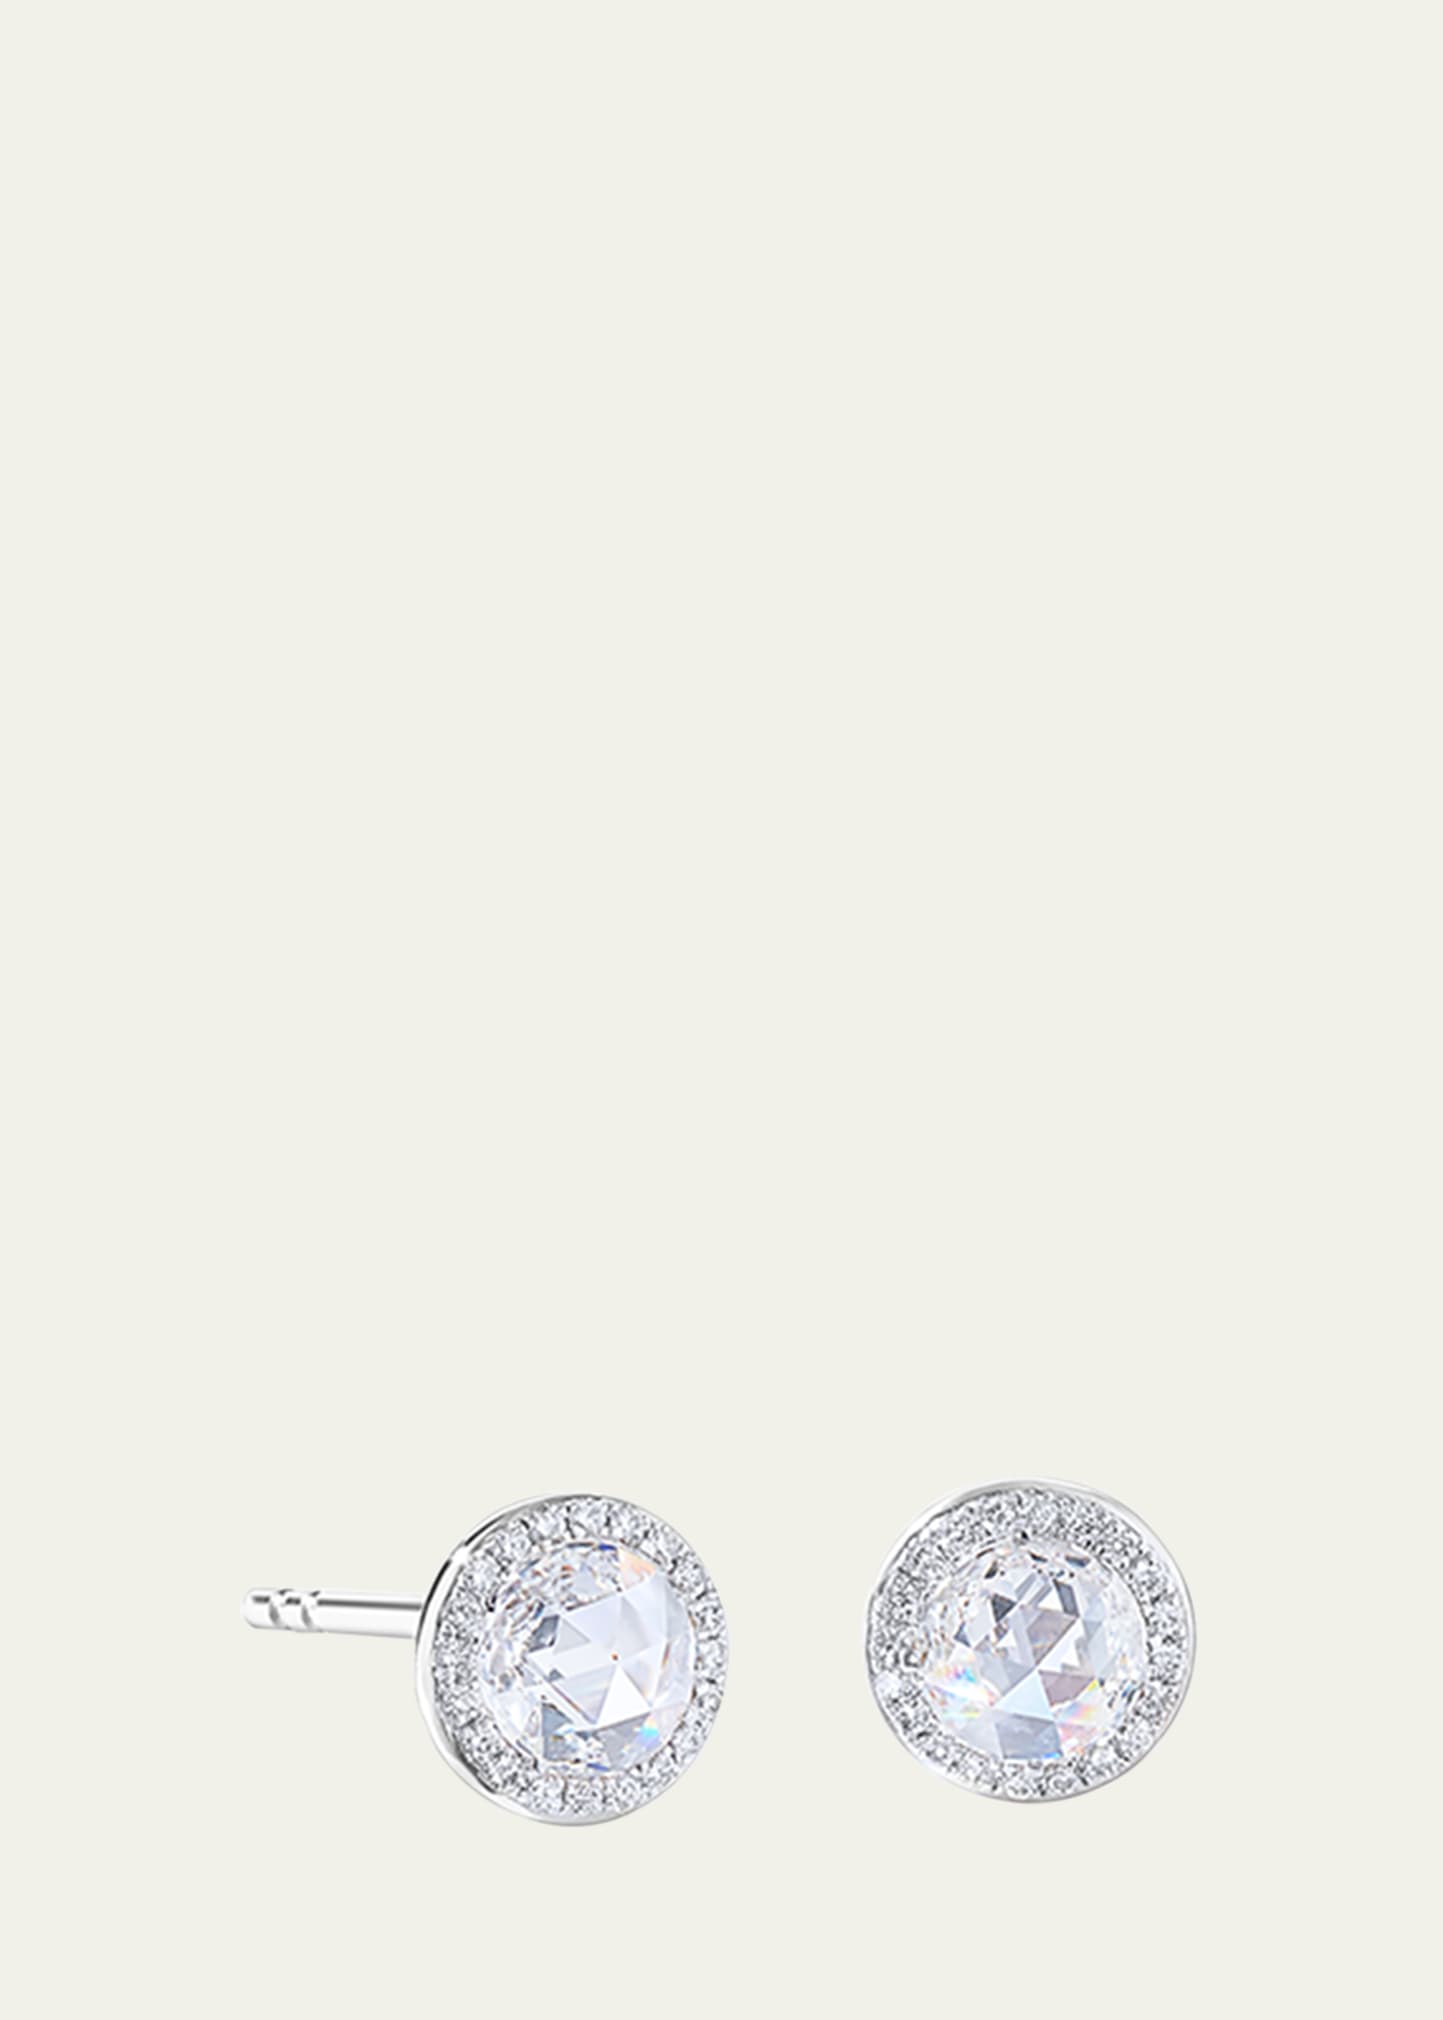 64 Facets 18k White Gold Solitaire Stud Earrings With Diamonds